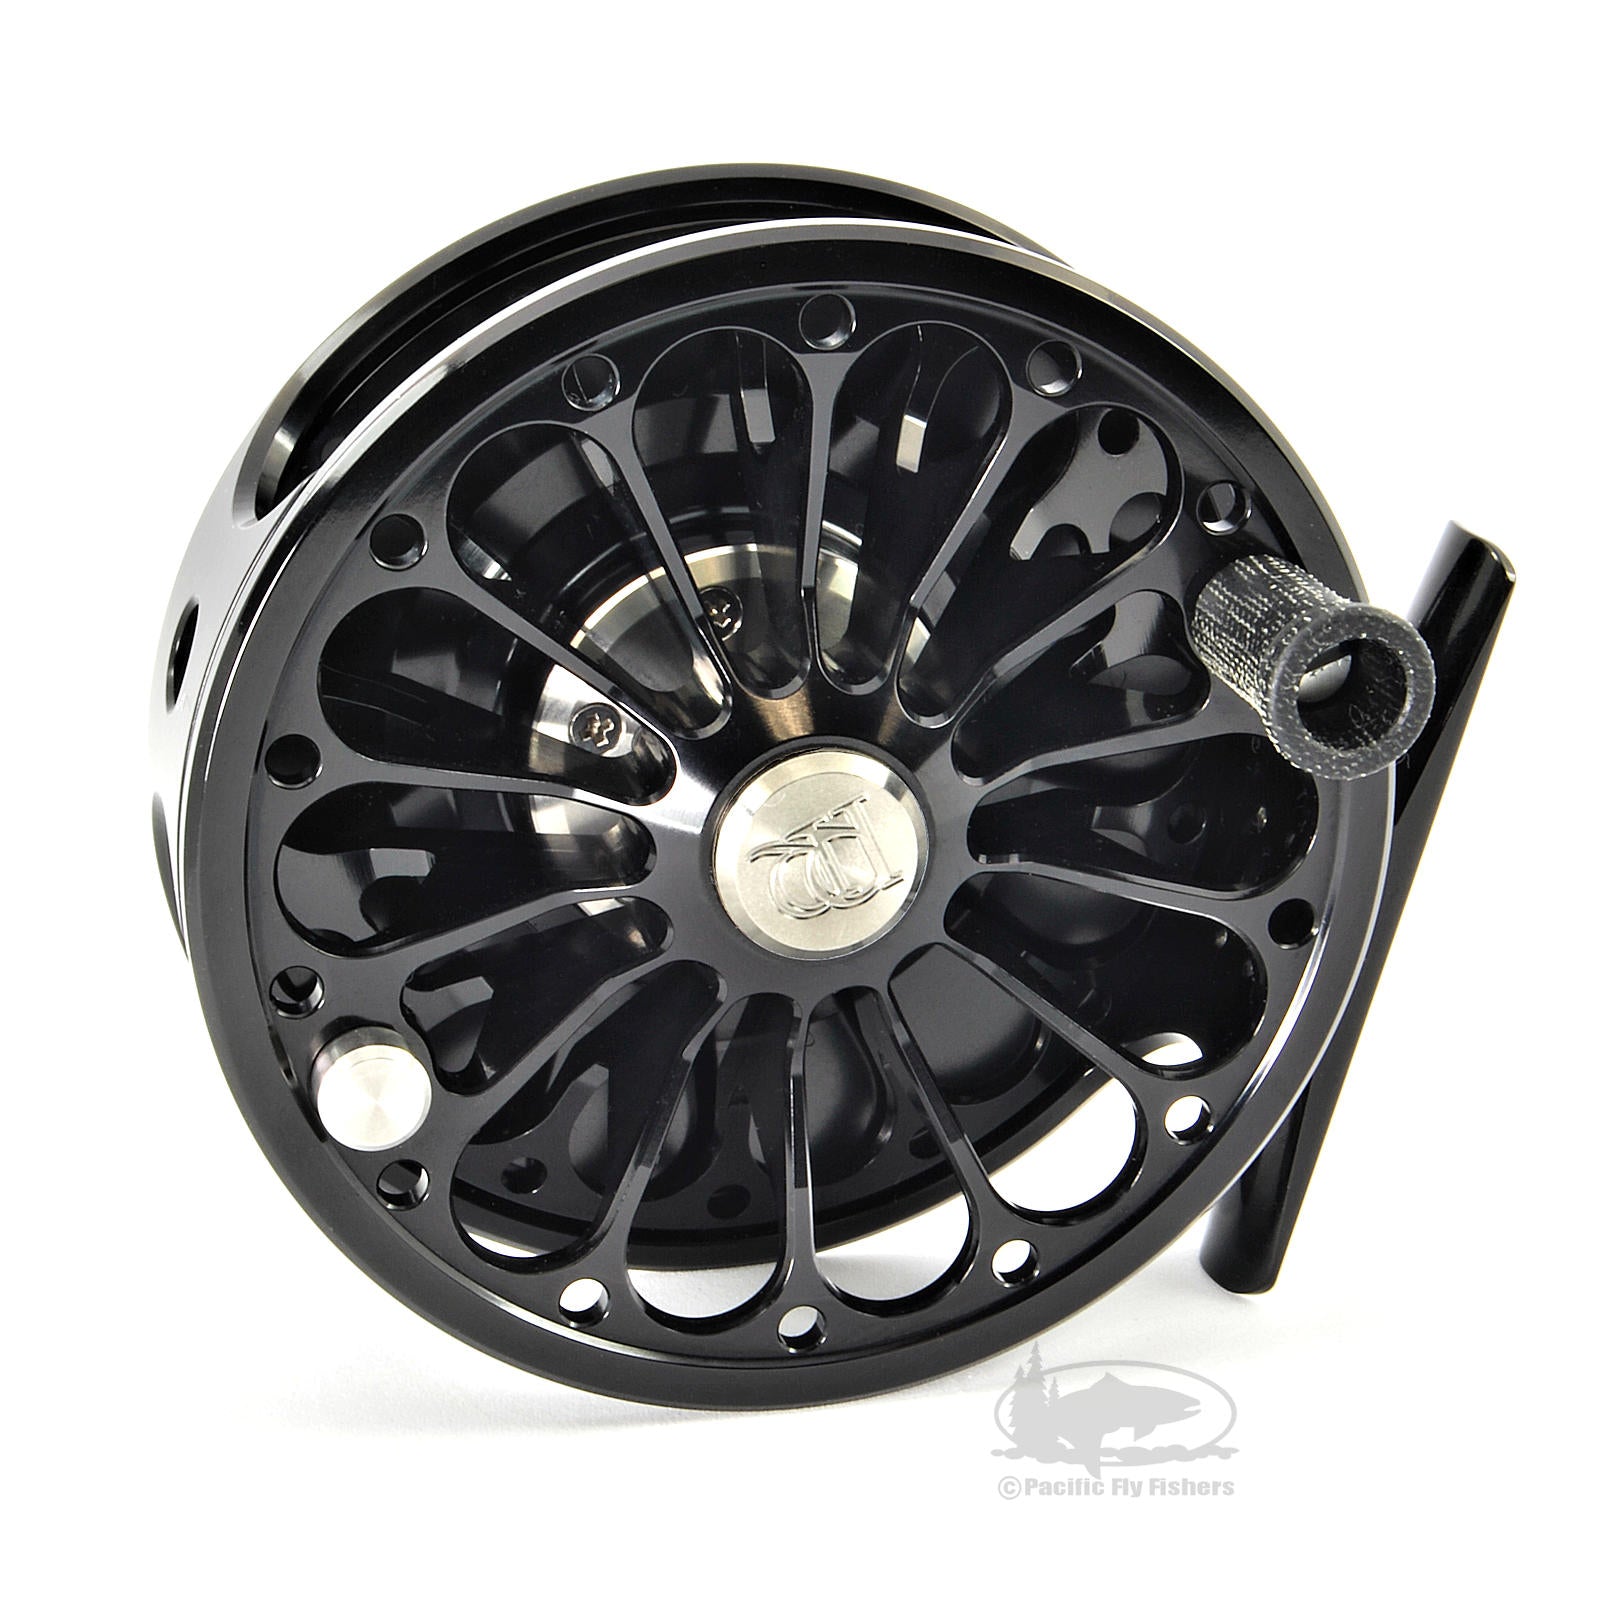 sold ROSS SAN MIGUEL 4/5 FLY REEL, NEW IN BOX